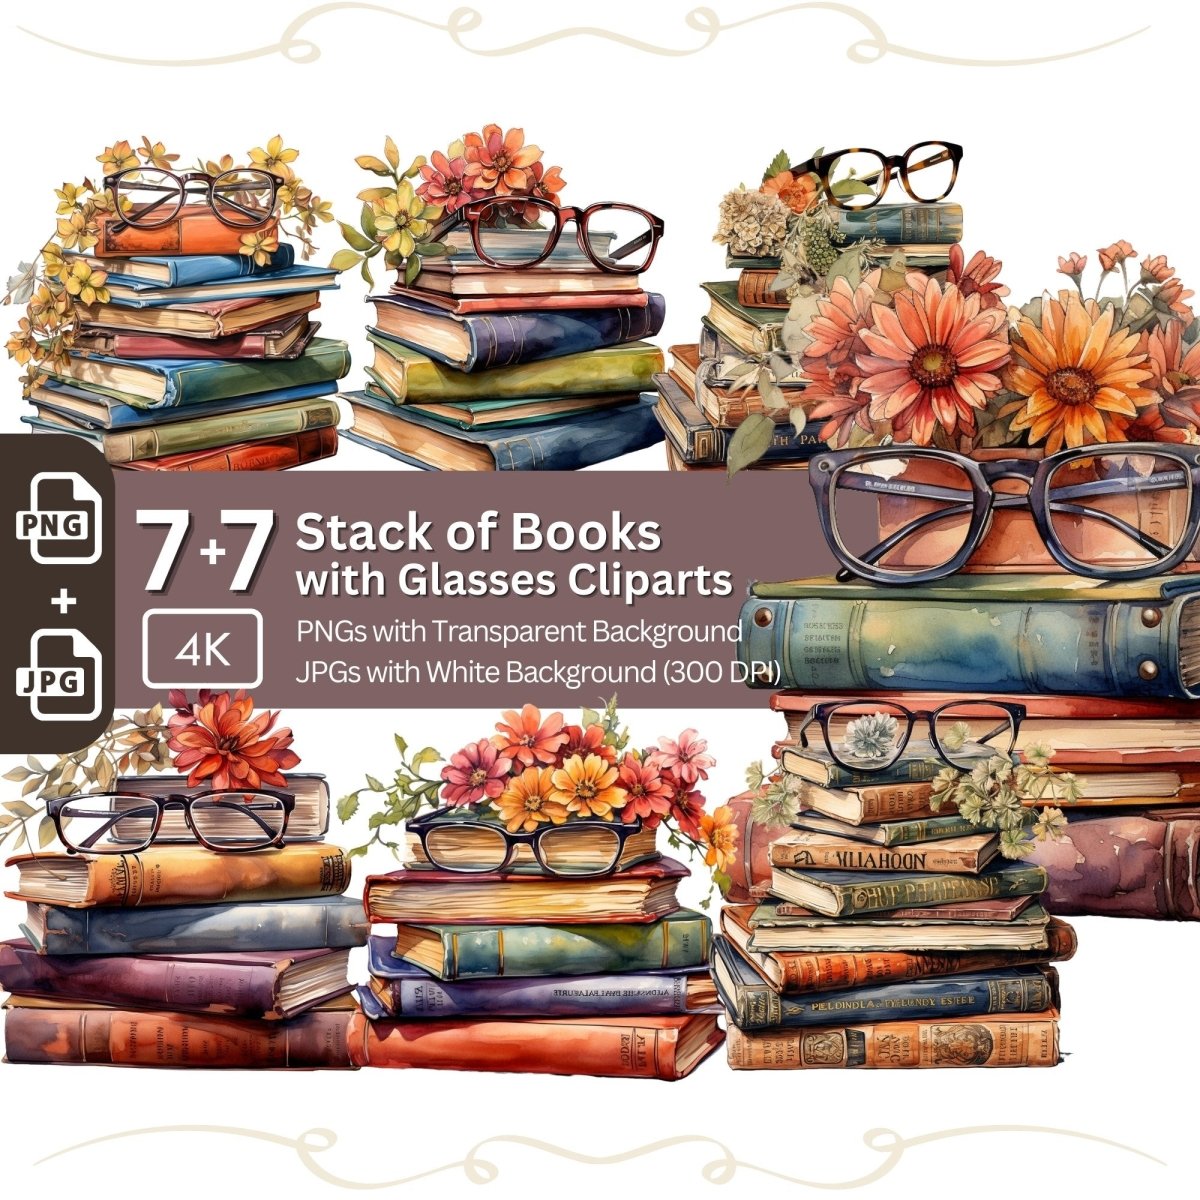 Stack of Books with Reading Glasses and Flower Accents Clipart 7+7 PNG JPG Bundle - Everything Pixel